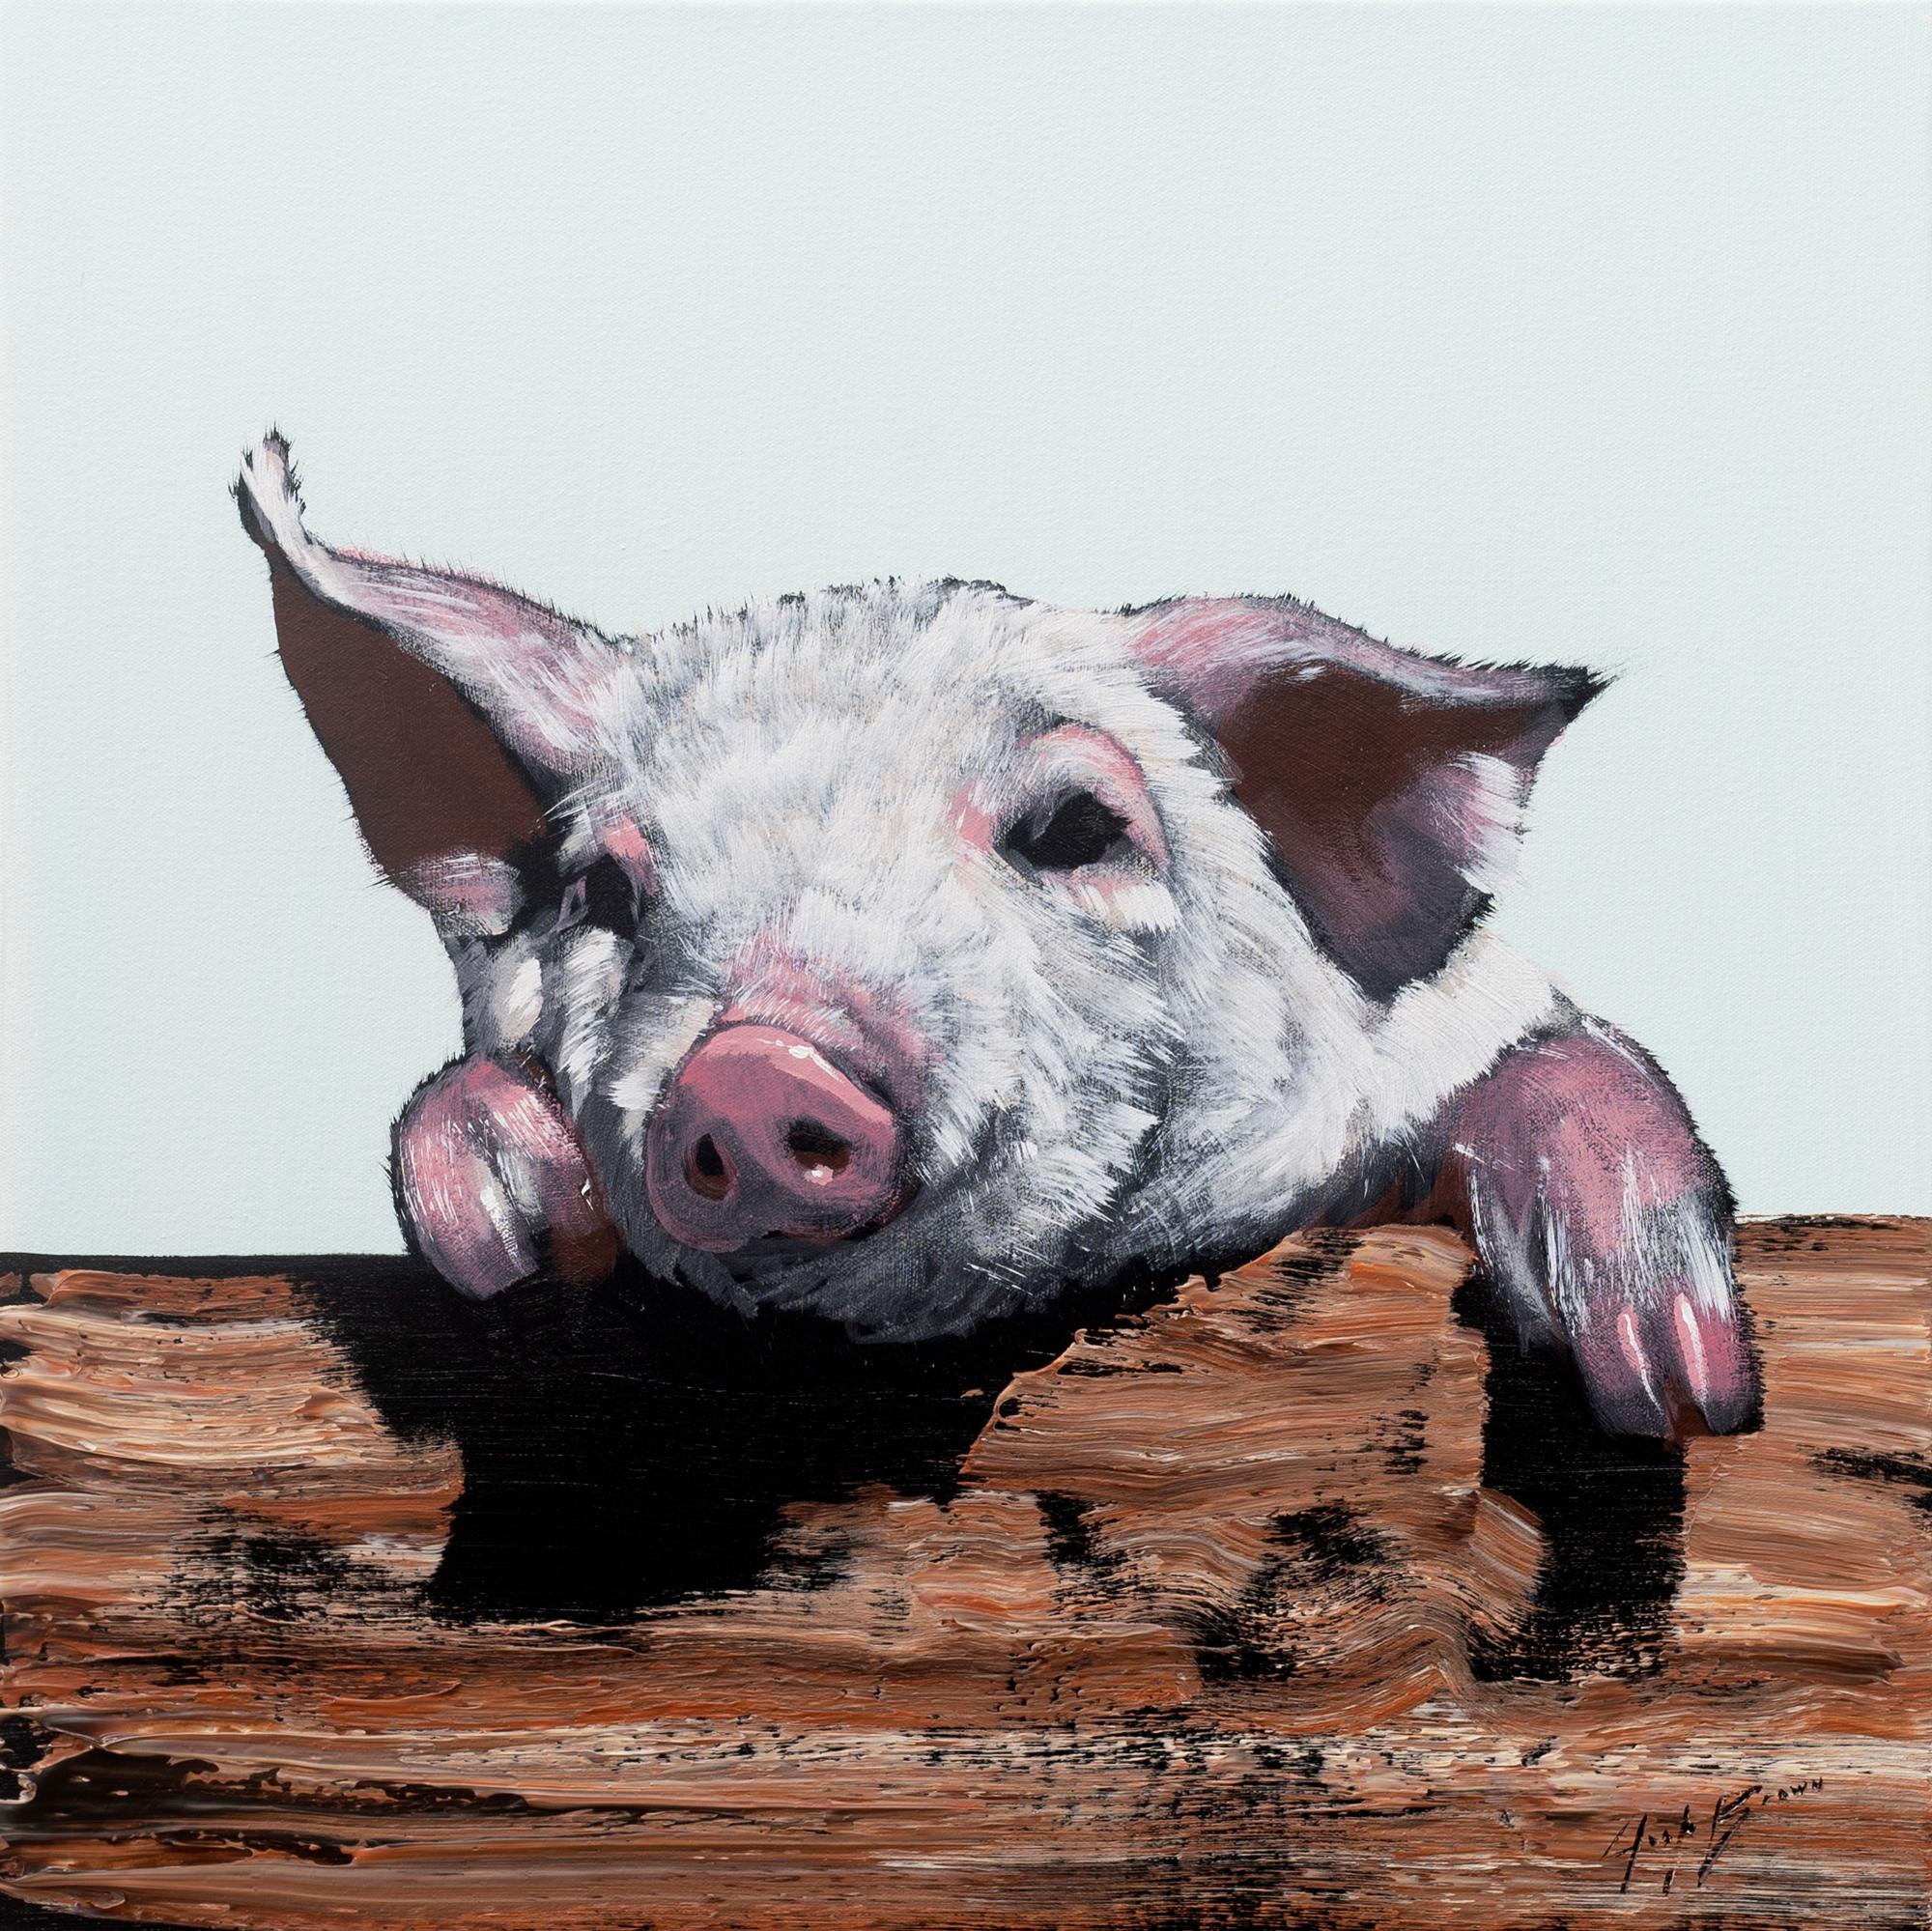 Pig on Fence 1 - Painting by Josh Brown